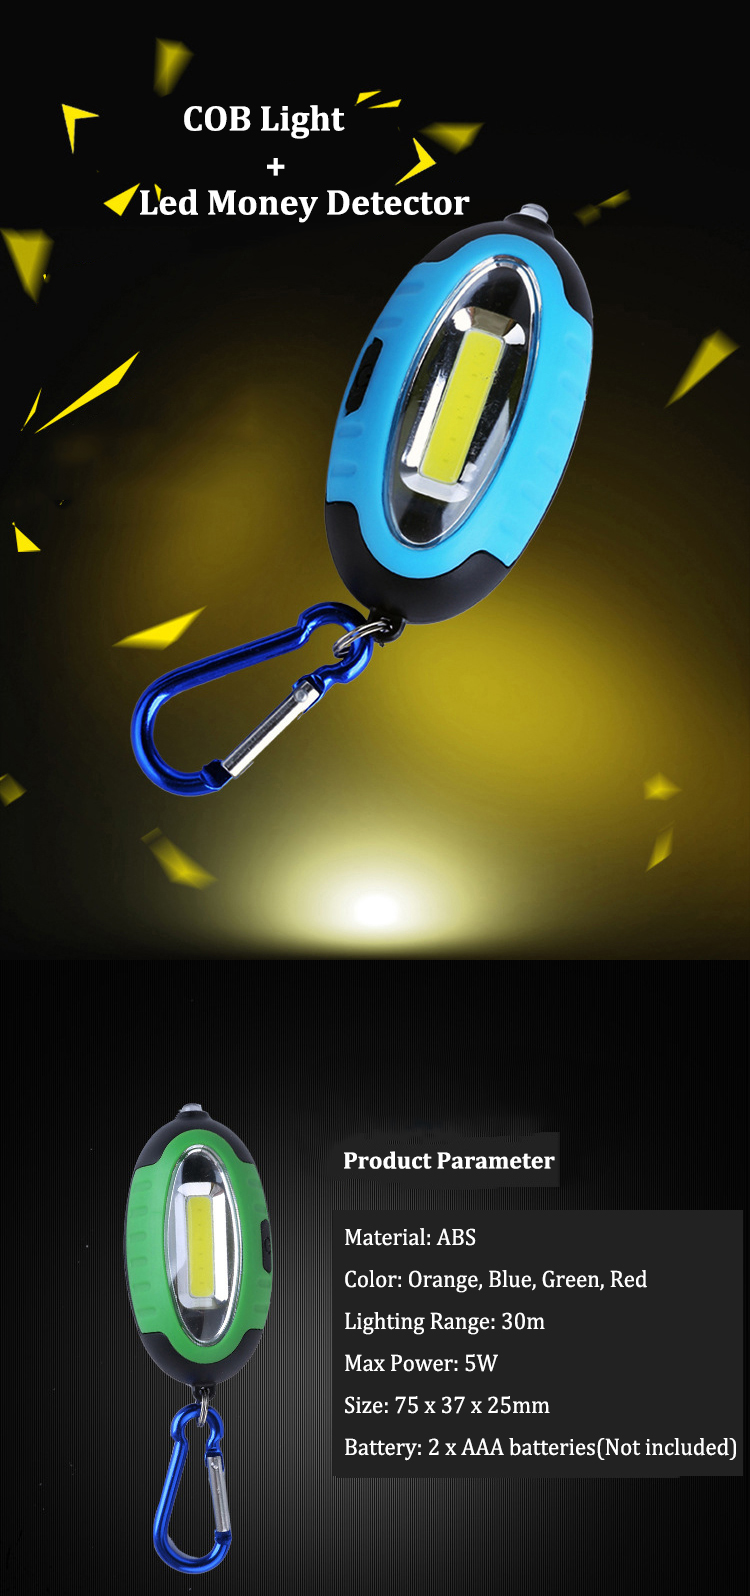 Outdooors-COB-LED-Keychain-Lamp-Work-Light-Mini-Pocket-Torch-Money-Detector-With-Carabiner-1118709